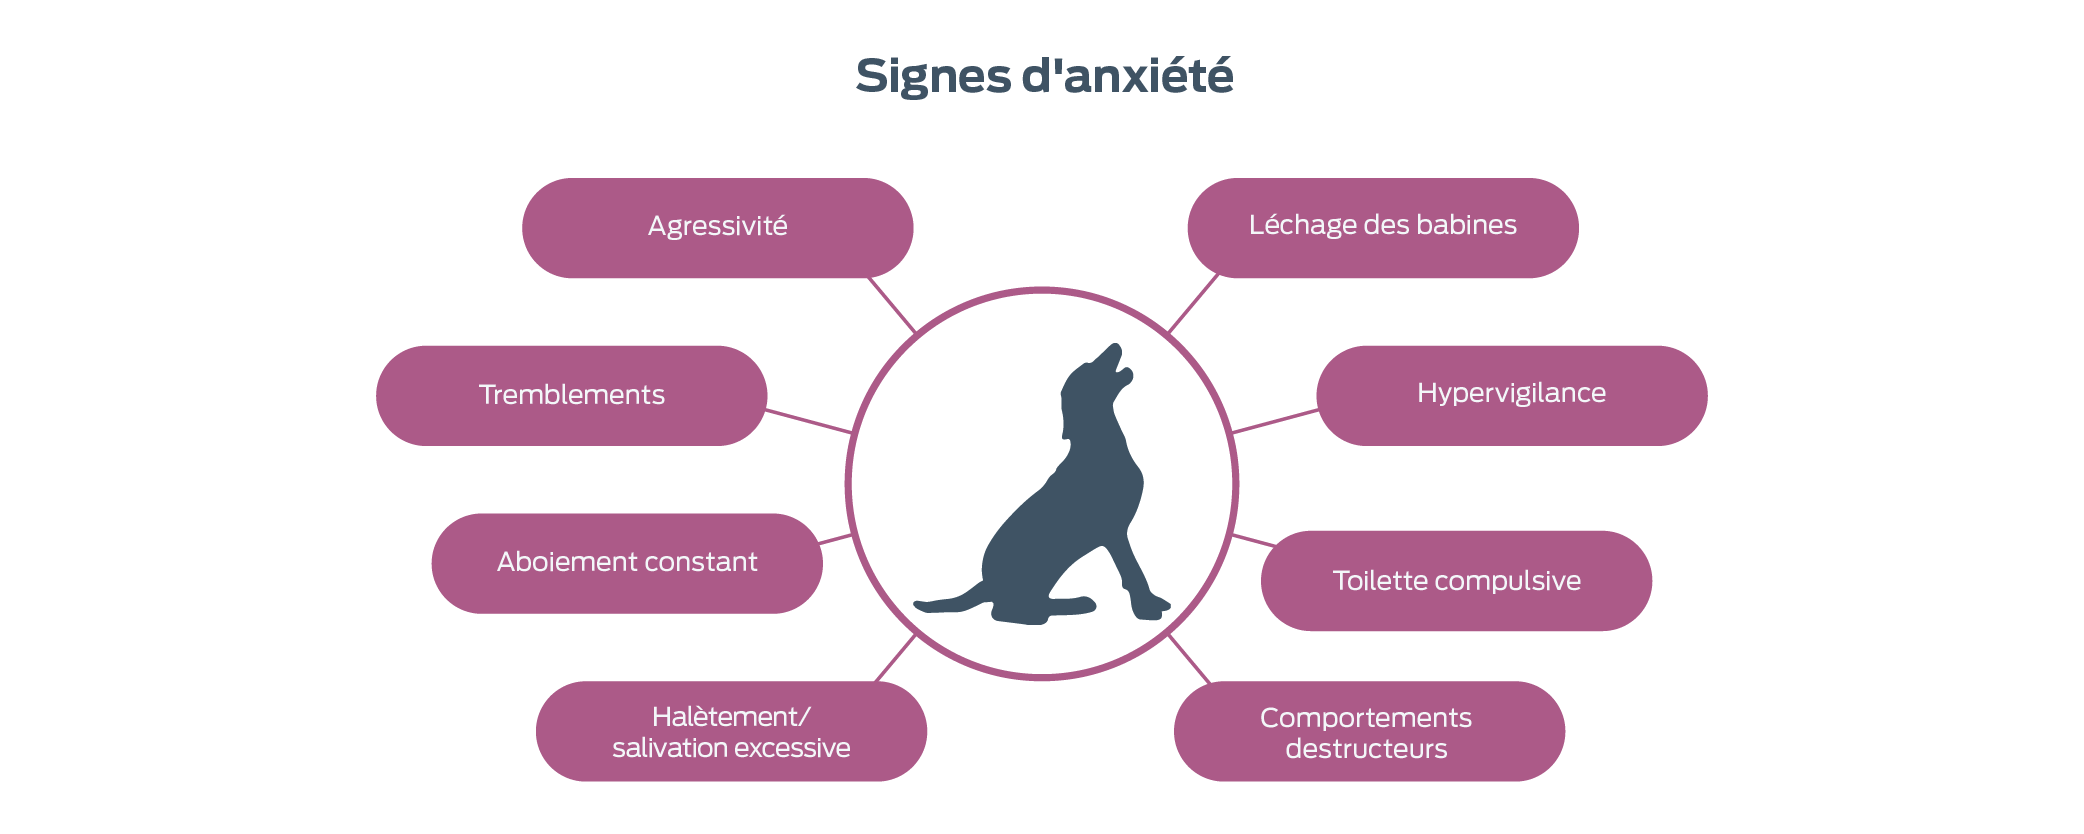 Signs of anxiety. Agression. Trembling. Persistent barking. Excessive panting/salivation. Lip smacking. Hyper-attentiveness. Compulsive grooming. Destructive behaviors.